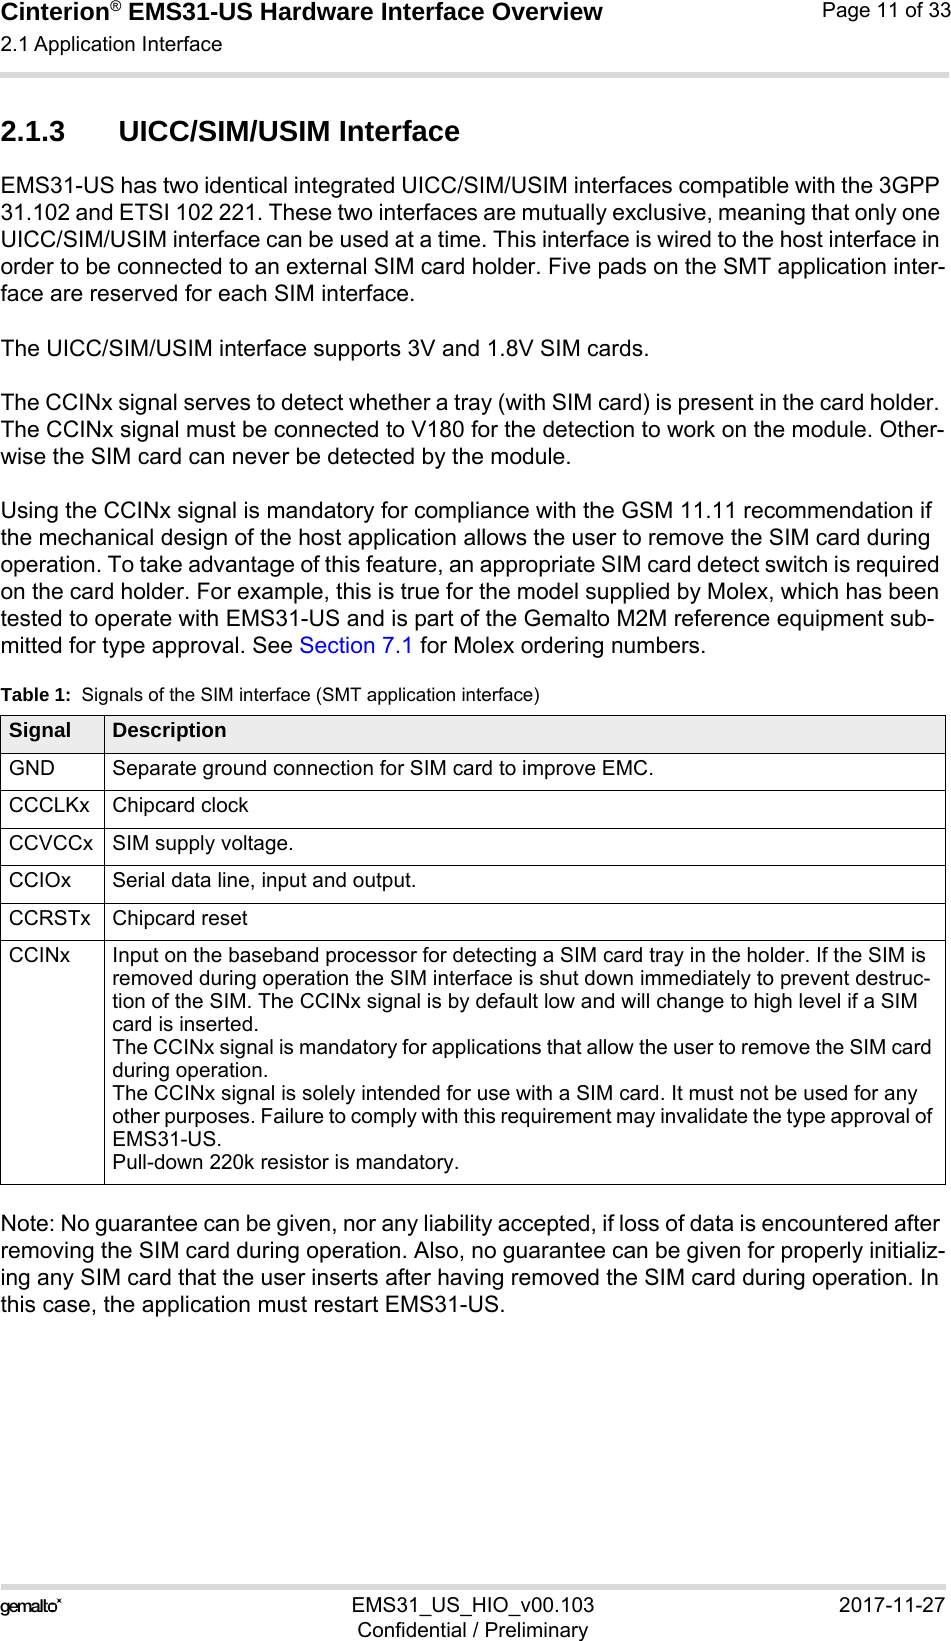 Cinterion® EMS31-US Hardware Interface Overview2.1 Application Interface17EMS31_US_HIO_v00.103 2017-11-27Confidential / PreliminaryPage 11 of 332.1.3 UICC/SIM/USIM InterfaceEMS31-US has two identical integrated UICC/SIM/USIM interfaces compatible with the 3GPP 31.102 and ETSI 102 221. These two interfaces are mutually exclusive, meaning that only one UICC/SIM/USIM interface can be used at a time. This interface is wired to the host interface in order to be connected to an external SIM card holder. Five pads on the SMT application inter-face are reserved for each SIM interface.The UICC/SIM/USIM interface supports 3V and 1.8V SIM cards. The CCINx signal serves to detect whether a tray (with SIM card) is present in the card holder. The CCINx signal must be connected to V180 for the detection to work on the module. Other-wise the SIM card can never be detected by the module.Using the CCINx signal is mandatory for compliance with the GSM 11.11 recommendation if the mechanical design of the host application allows the user to remove the SIM card during operation. To take advantage of this feature, an appropriate SIM card detect switch is required on the card holder. For example, this is true for the model supplied by Molex, which has been tested to operate with EMS31-US and is part of the Gemalto M2M reference equipment sub-mitted for type approval. See Section 7.1 for Molex ordering numbers.Note: No guarantee can be given, nor any liability accepted, if loss of data is encountered after removing the SIM card during operation. Also, no guarantee can be given for properly initializ-ing any SIM card that the user inserts after having removed the SIM card during operation. In this case, the application must restart EMS31-US.Table 1:  Signals of the SIM interface (SMT application interface)Signal DescriptionGND Separate ground connection for SIM card to improve EMC.CCCLKx Chipcard clockCCVCCx SIM supply voltage.CCIOx Serial data line, input and output.CCRSTx Chipcard resetCCINx Input on the baseband processor for detecting a SIM card tray in the holder. If the SIM is removed during operation the SIM interface is shut down immediately to prevent destruc-tion of the SIM. The CCINx signal is by default low and will change to high level if a SIM card is inserted.The CCINx signal is mandatory for applications that allow the user to remove the SIM card during operation. The CCINx signal is solely intended for use with a SIM card. It must not be used for any other purposes. Failure to comply with this requirement may invalidate the type approval of EMS31-US.Pull-down 220k resistor is mandatory.